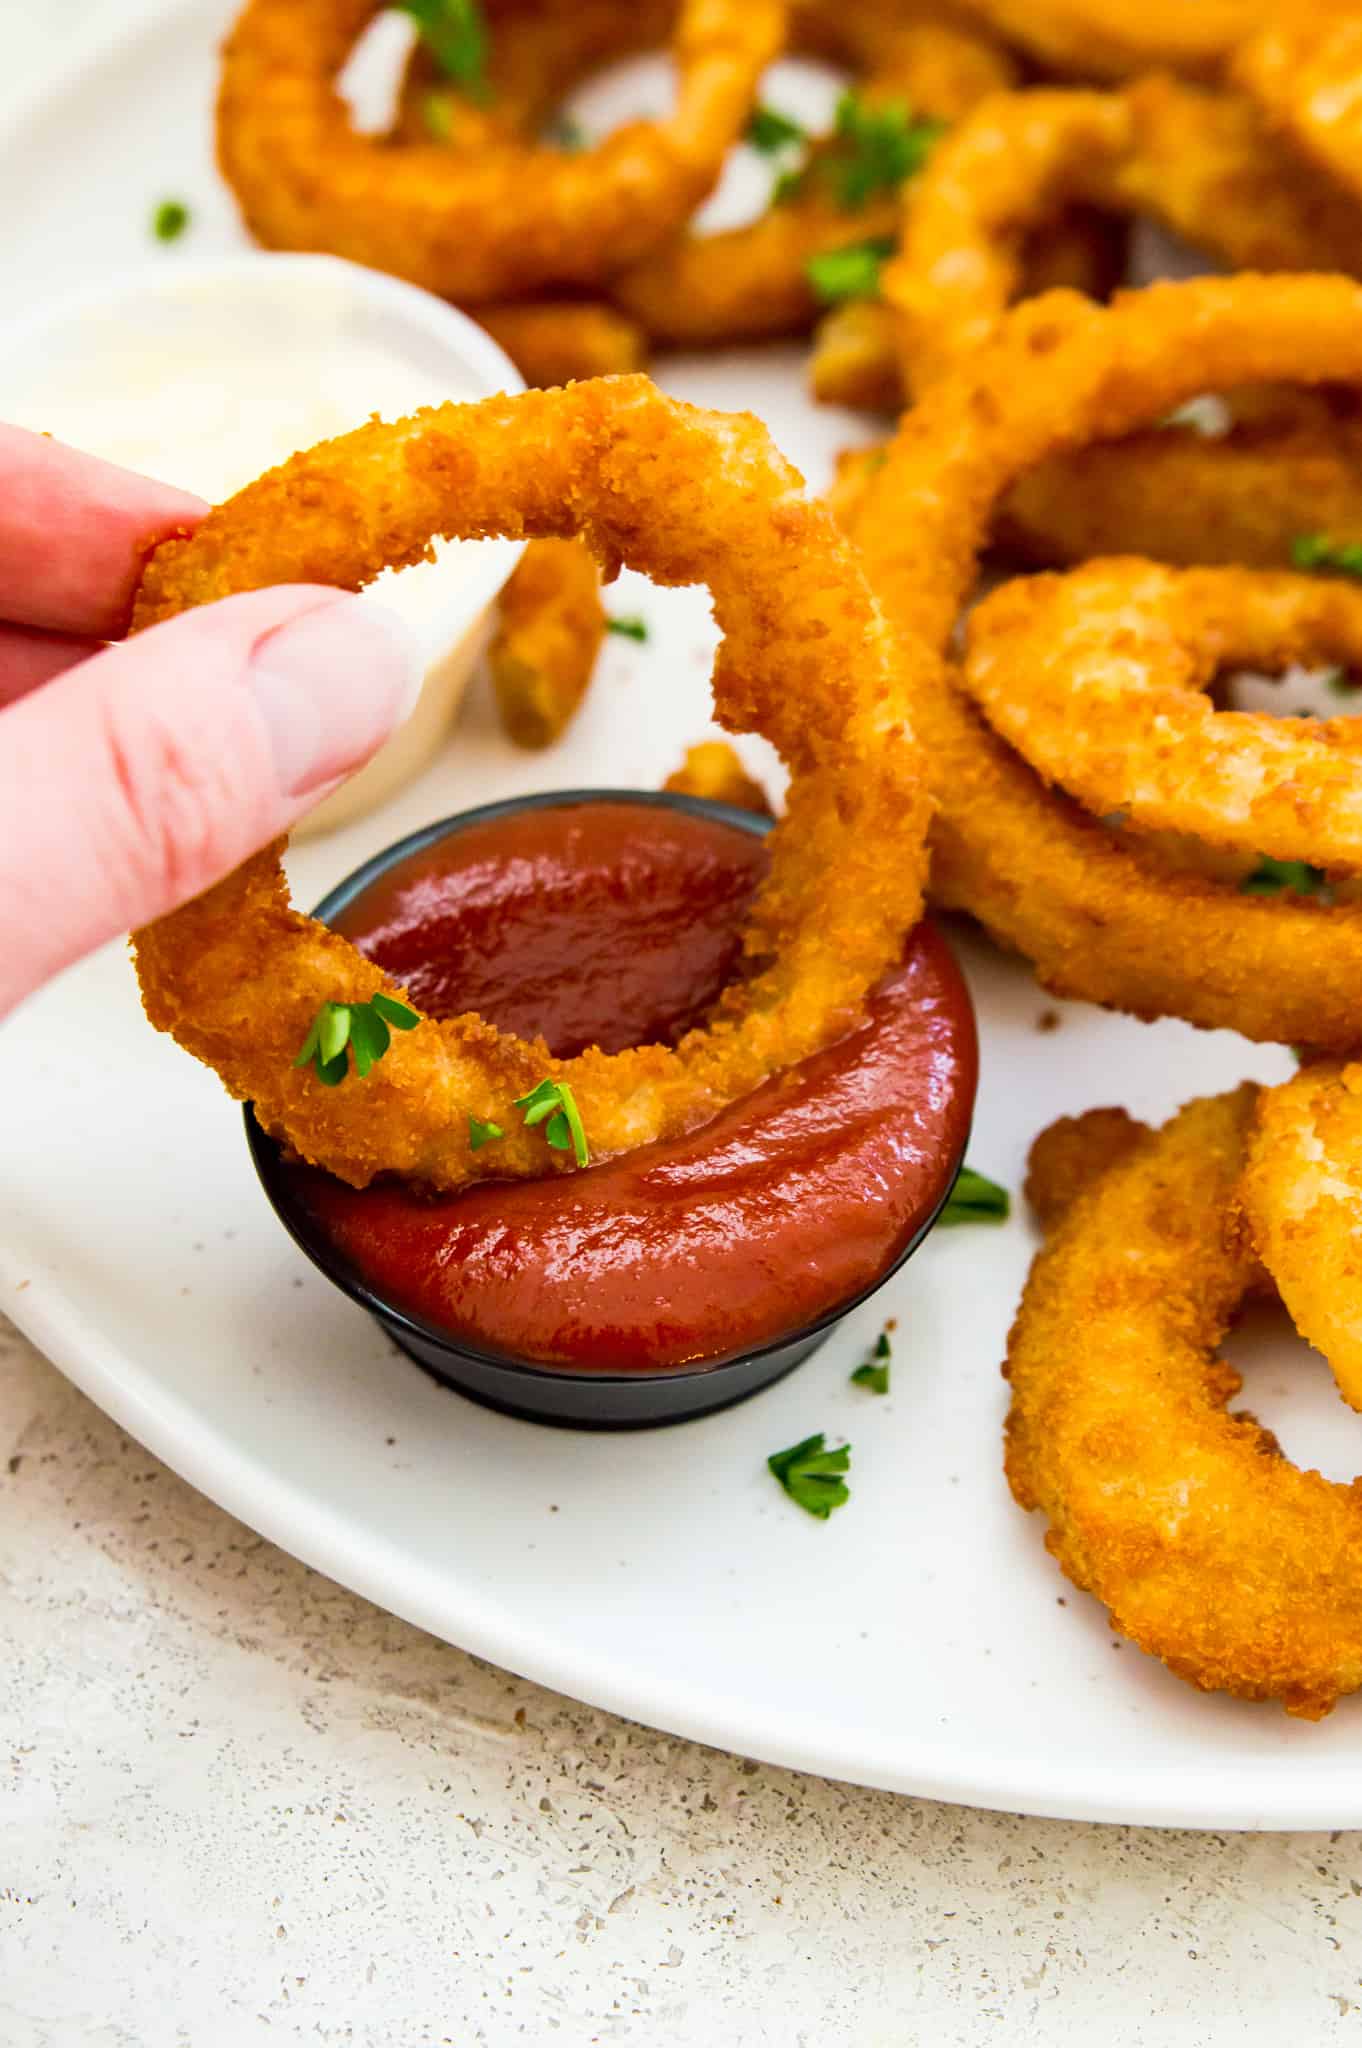 A cooked onion ring being dipped in a bowl of of ketchup.